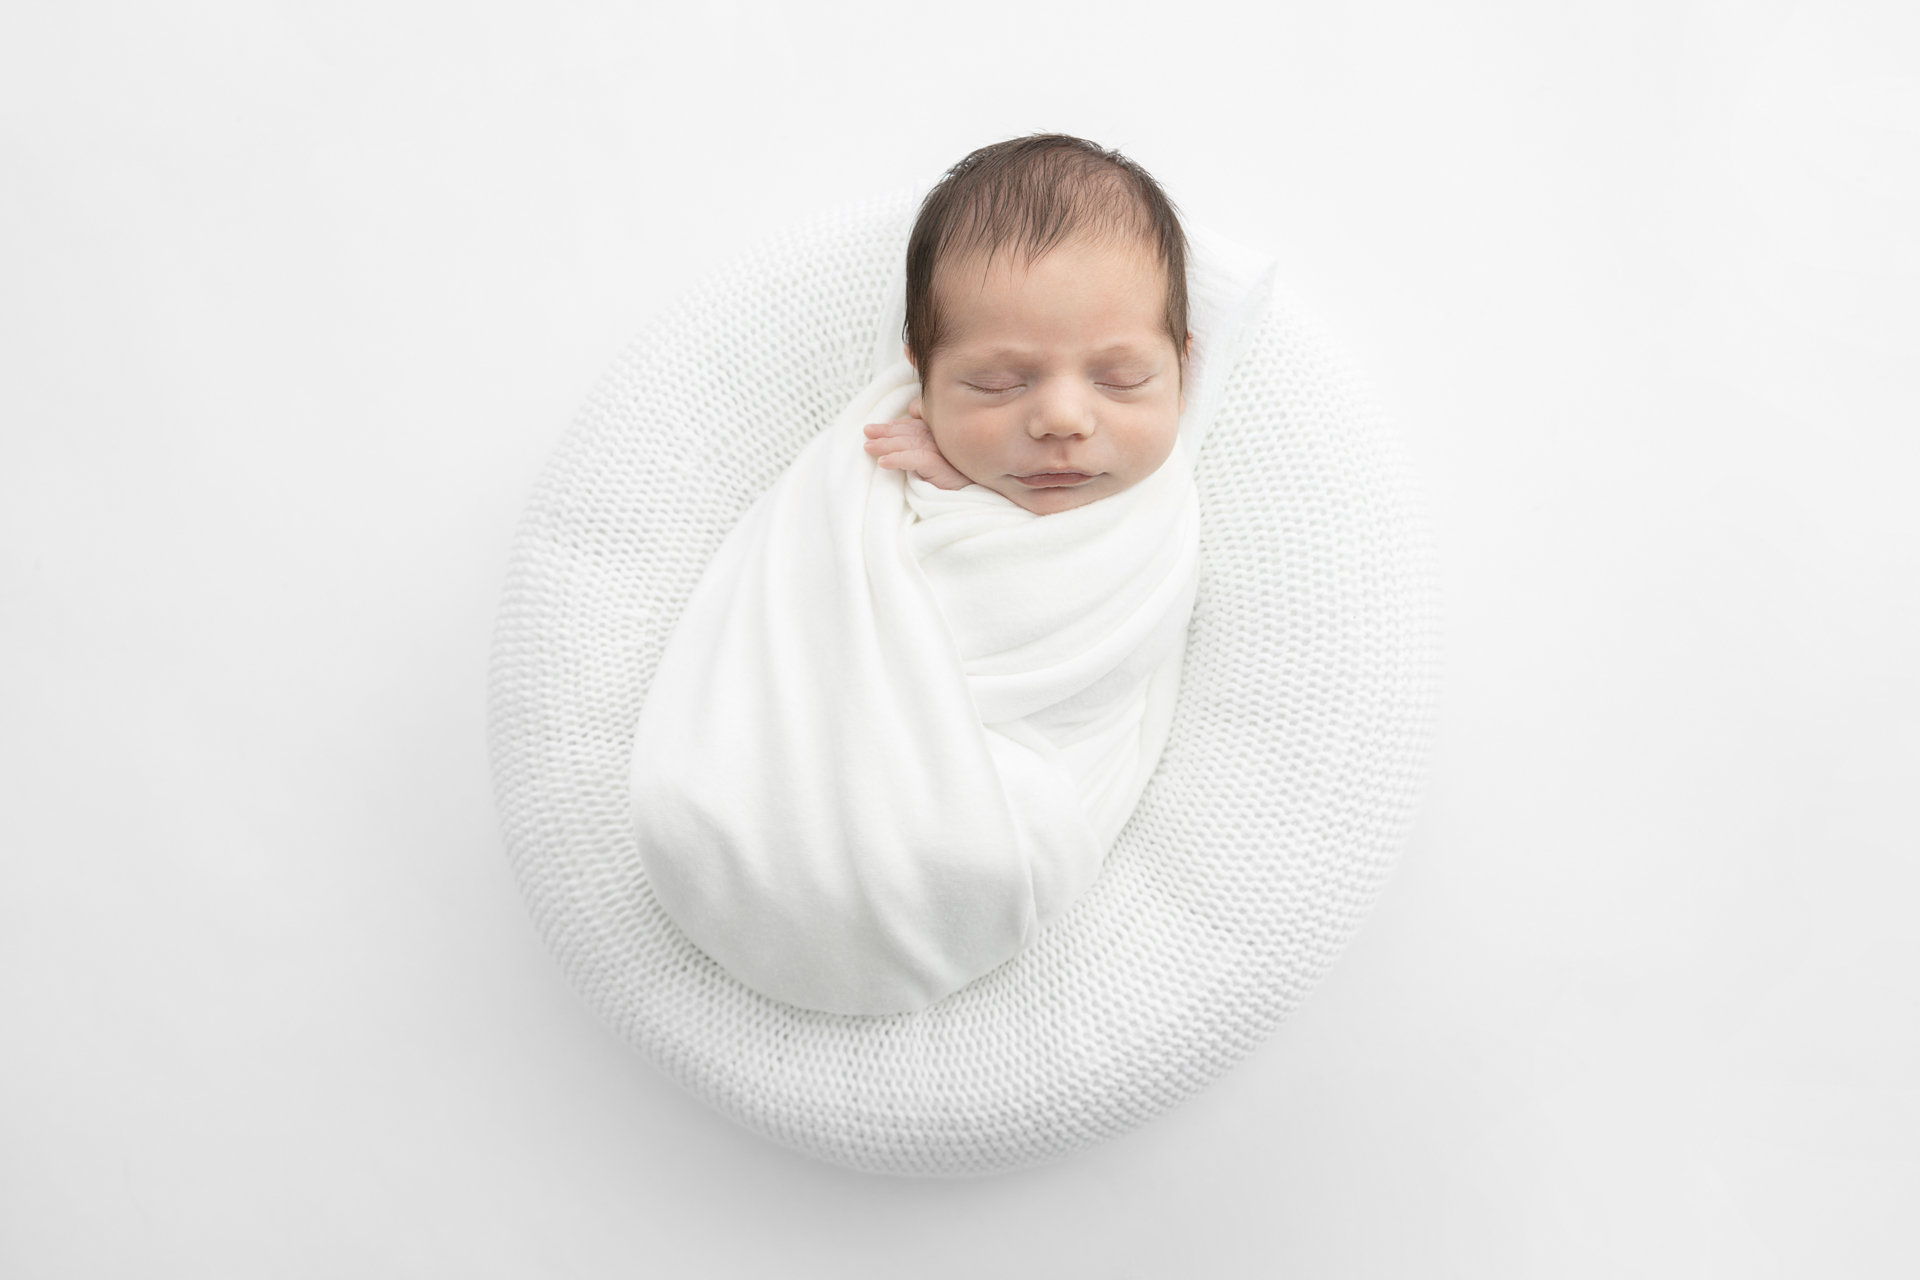 newborn baby wrapped in white asleep on a white knit pouf; white background